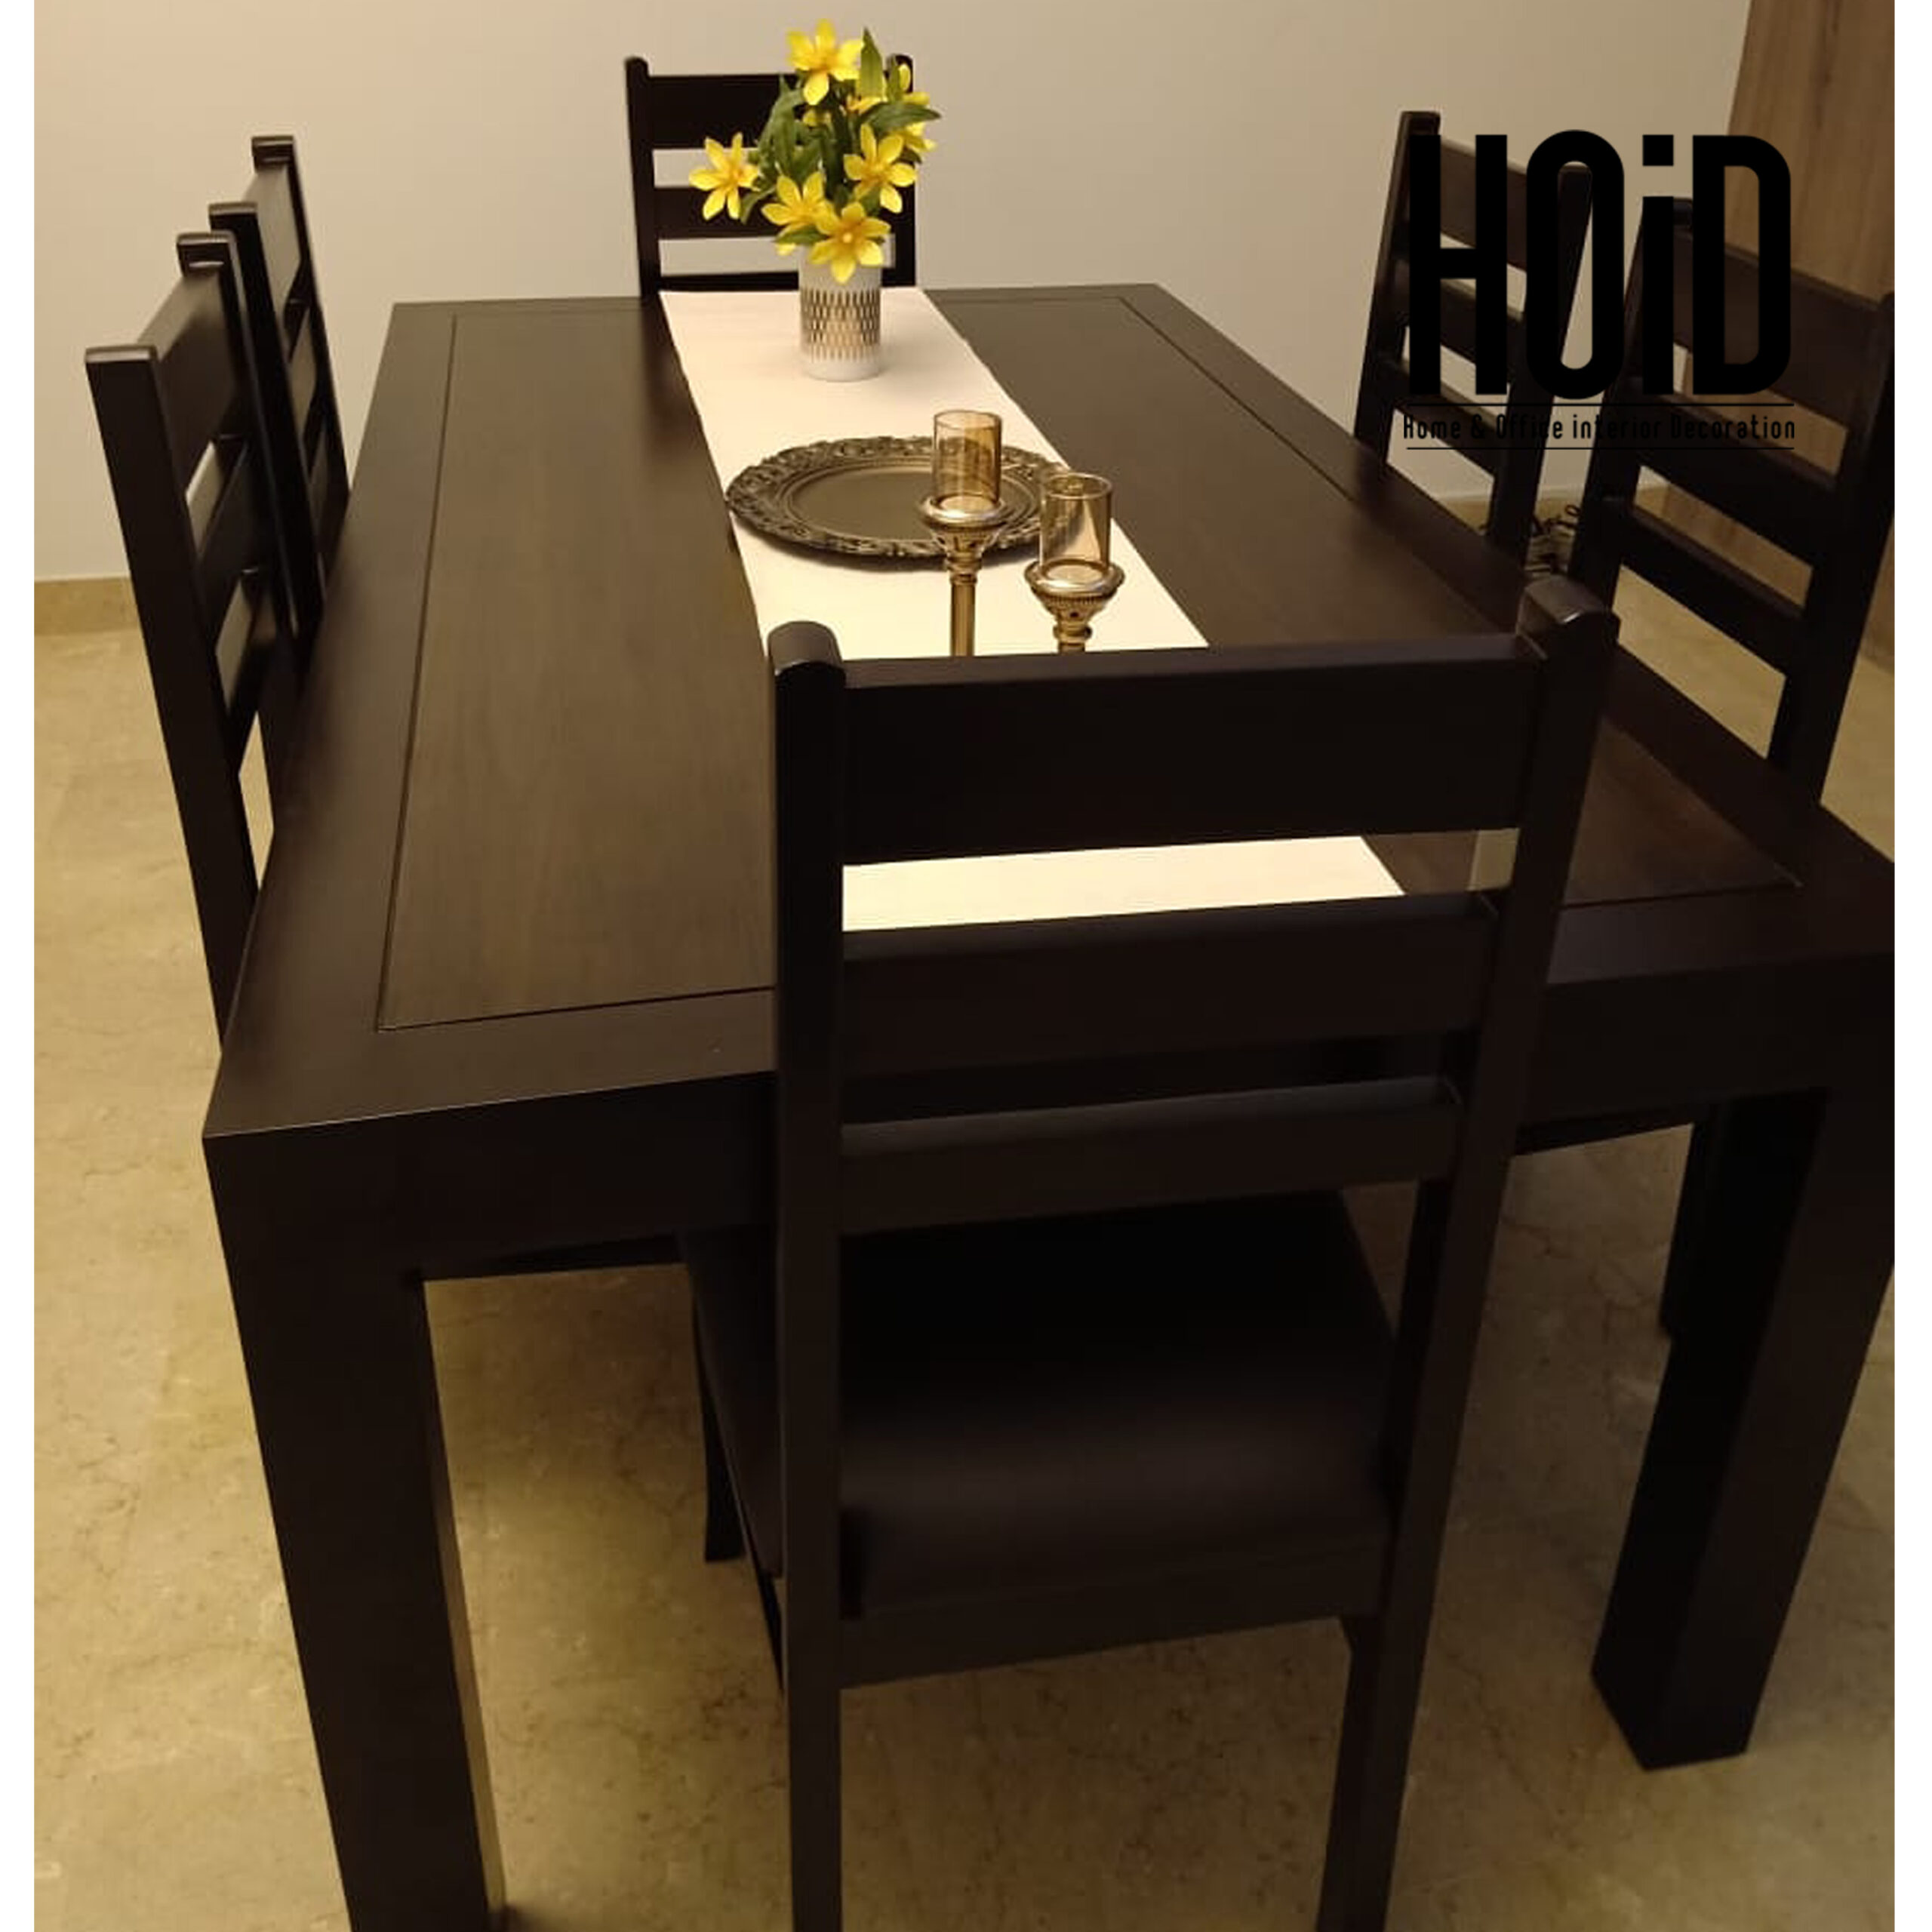 6 Seater Dining Table With Chairs, 6 Chair Dining Table Measurement